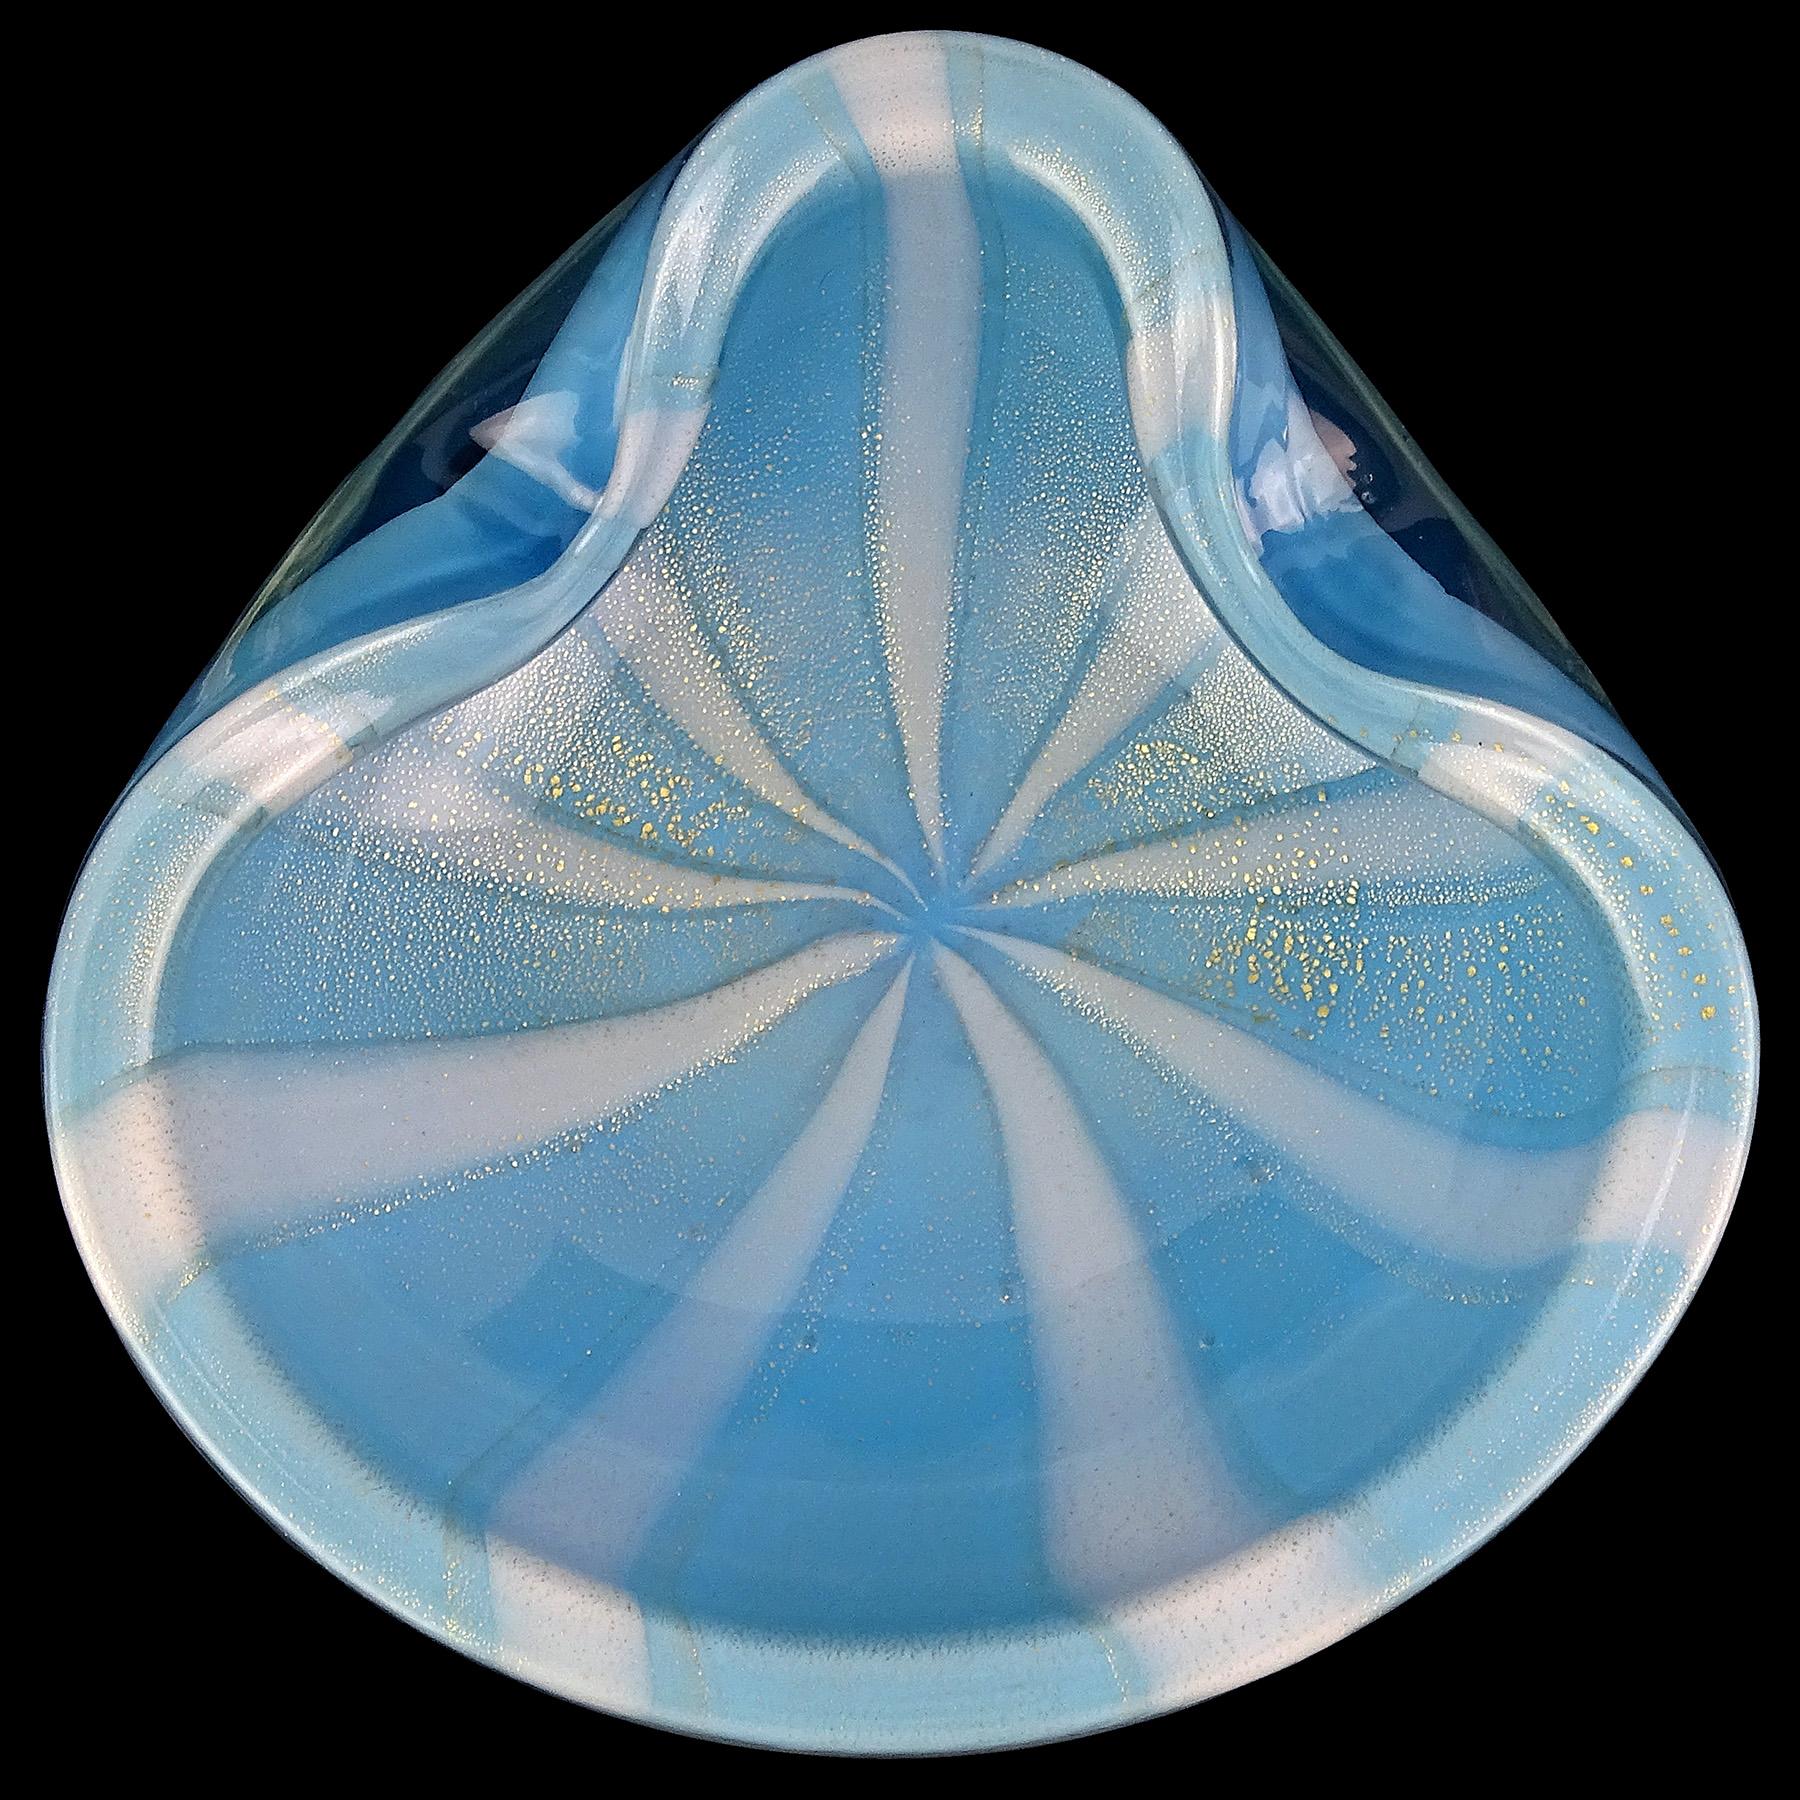 Beautiful vintage Murano hand blown sky blue, white stripes and gold flecks Italian art glass decorative bowl. Documented to Master glass artist and designer Alfredo Barbini, circa 1950s. Published in his catalog. The bowl has 2 folded areas on the